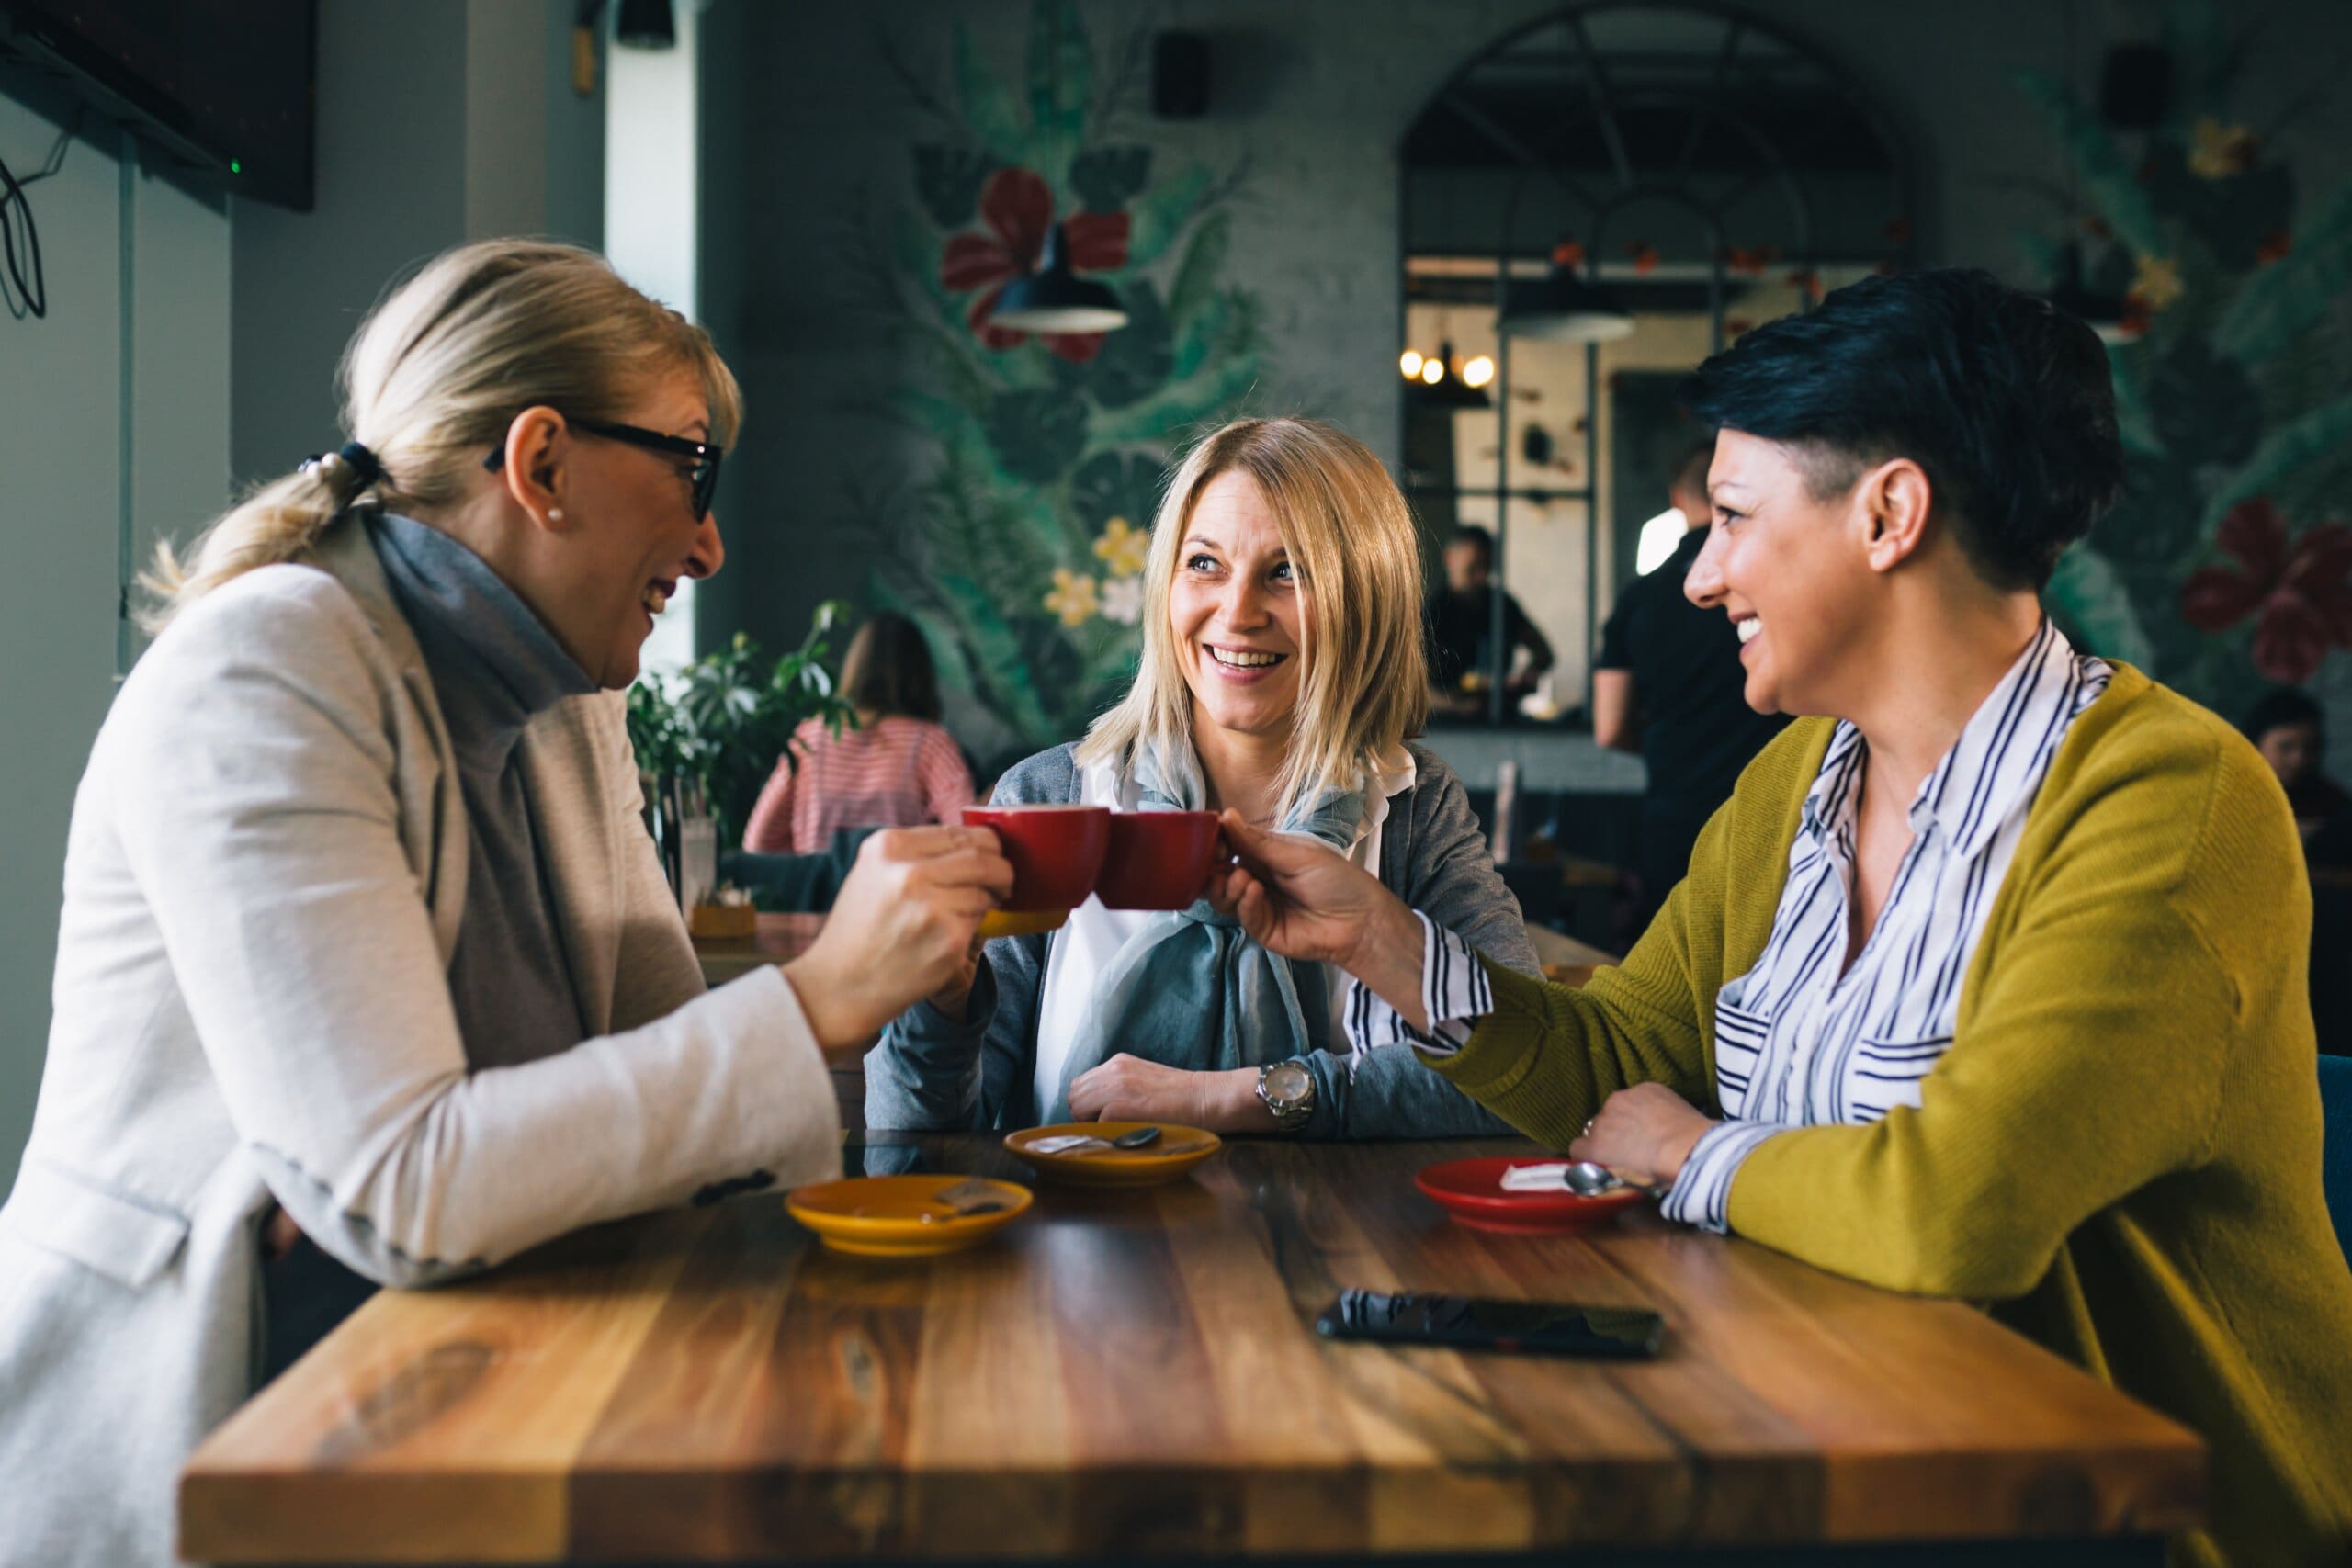 Three middle aged women laughing chatting drinking coffee in a cafe.